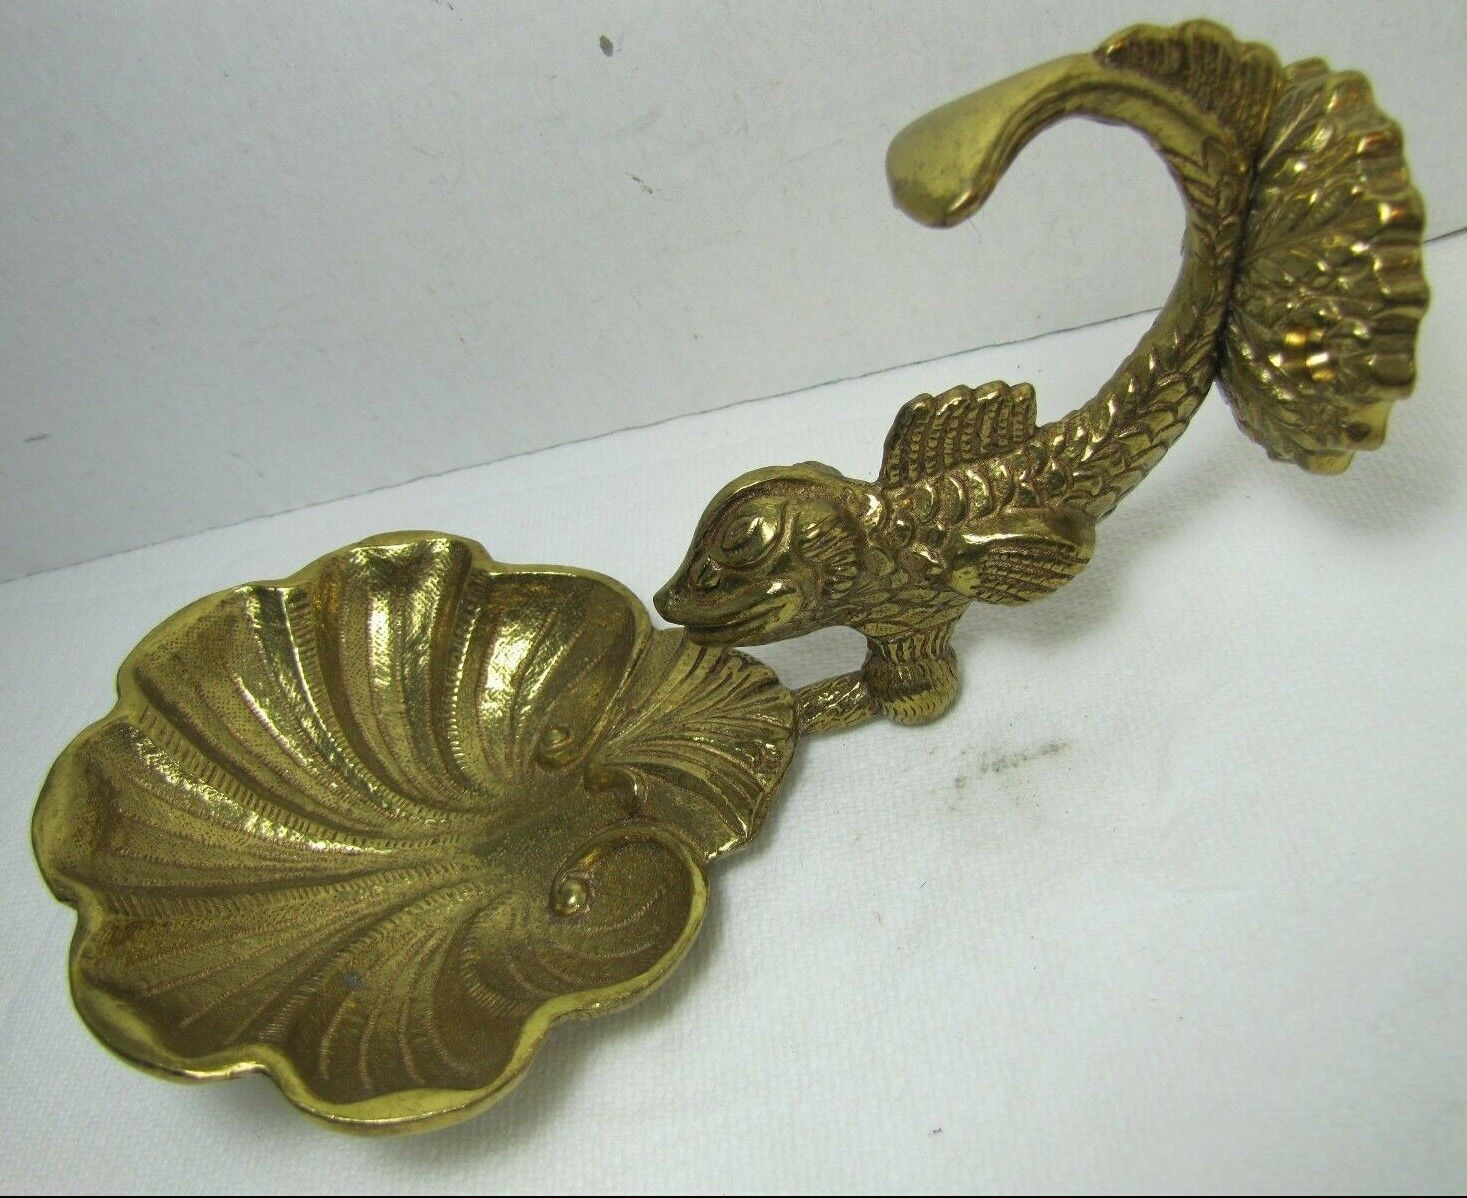 FISH Vtg Figural Soap DISH exquisite ornate details wall mnt scales shell brass